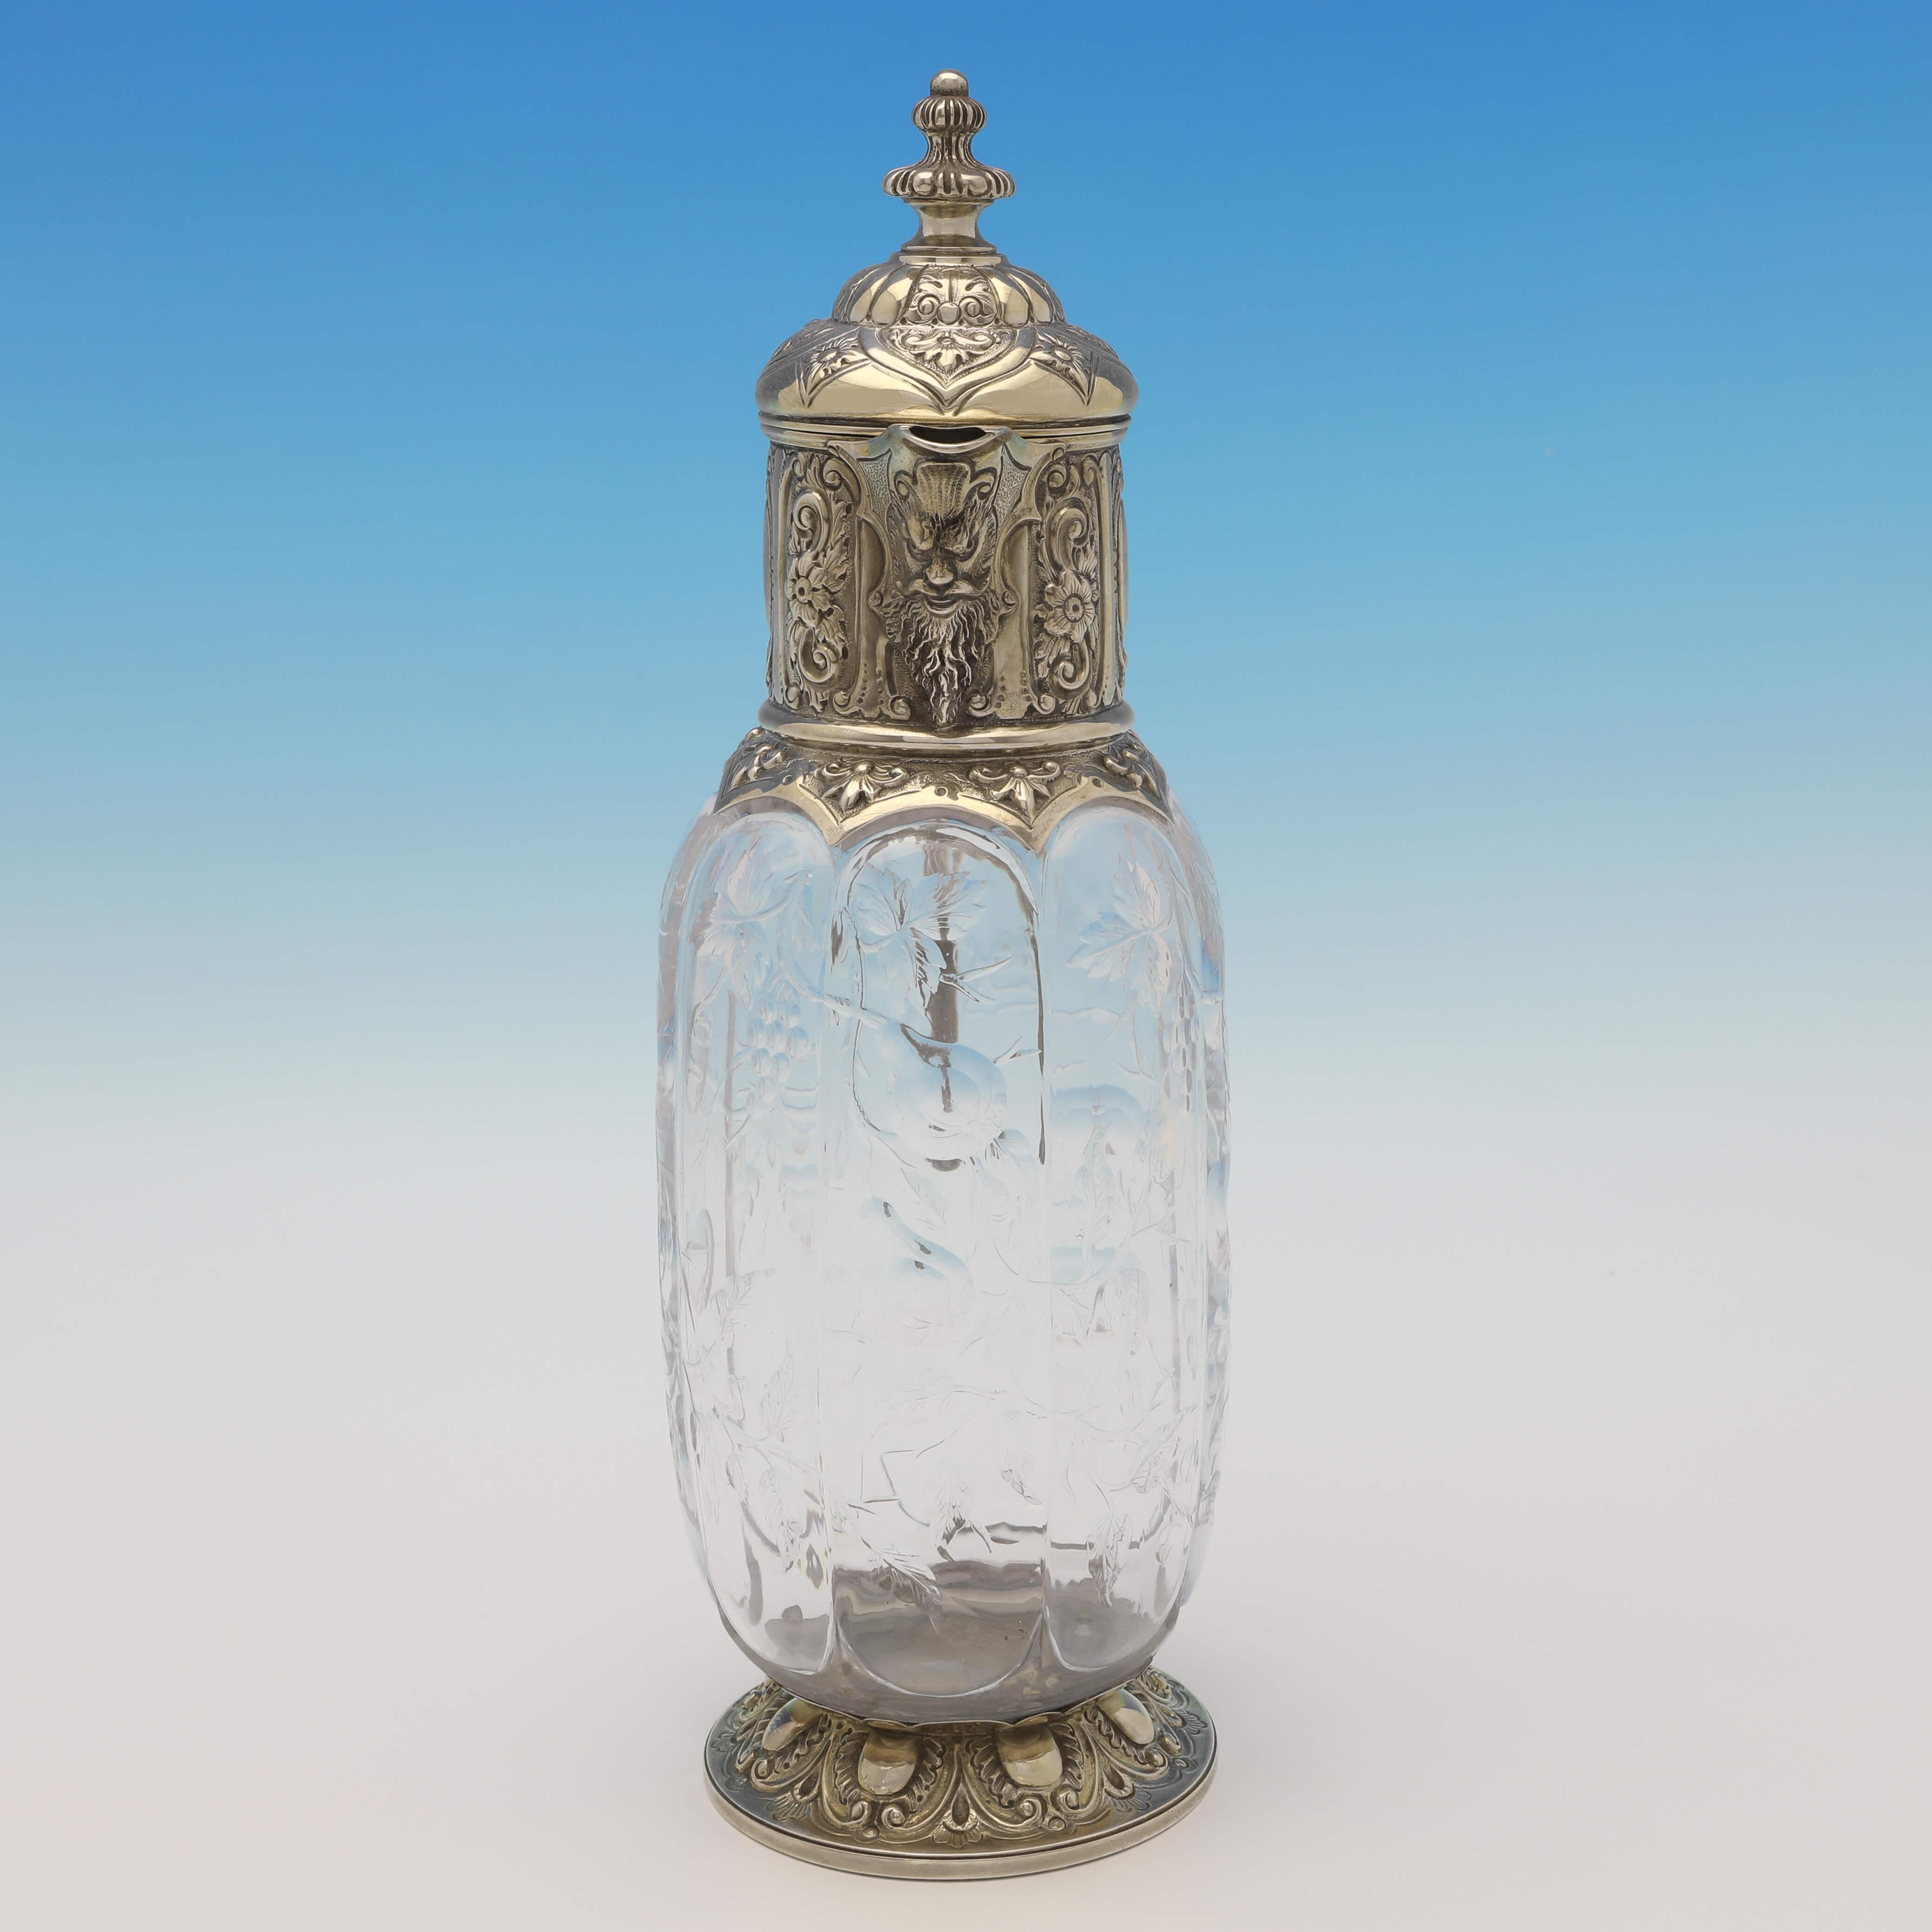 Hallmarked in London in 1891 by Charles Edwards, this stunning, Victorian, Antique Sterling Silver Claret Jug, features an etched glass body likely designed by Thomas Webb, and an ornate gilt silver mount and foot. The claret jug measures